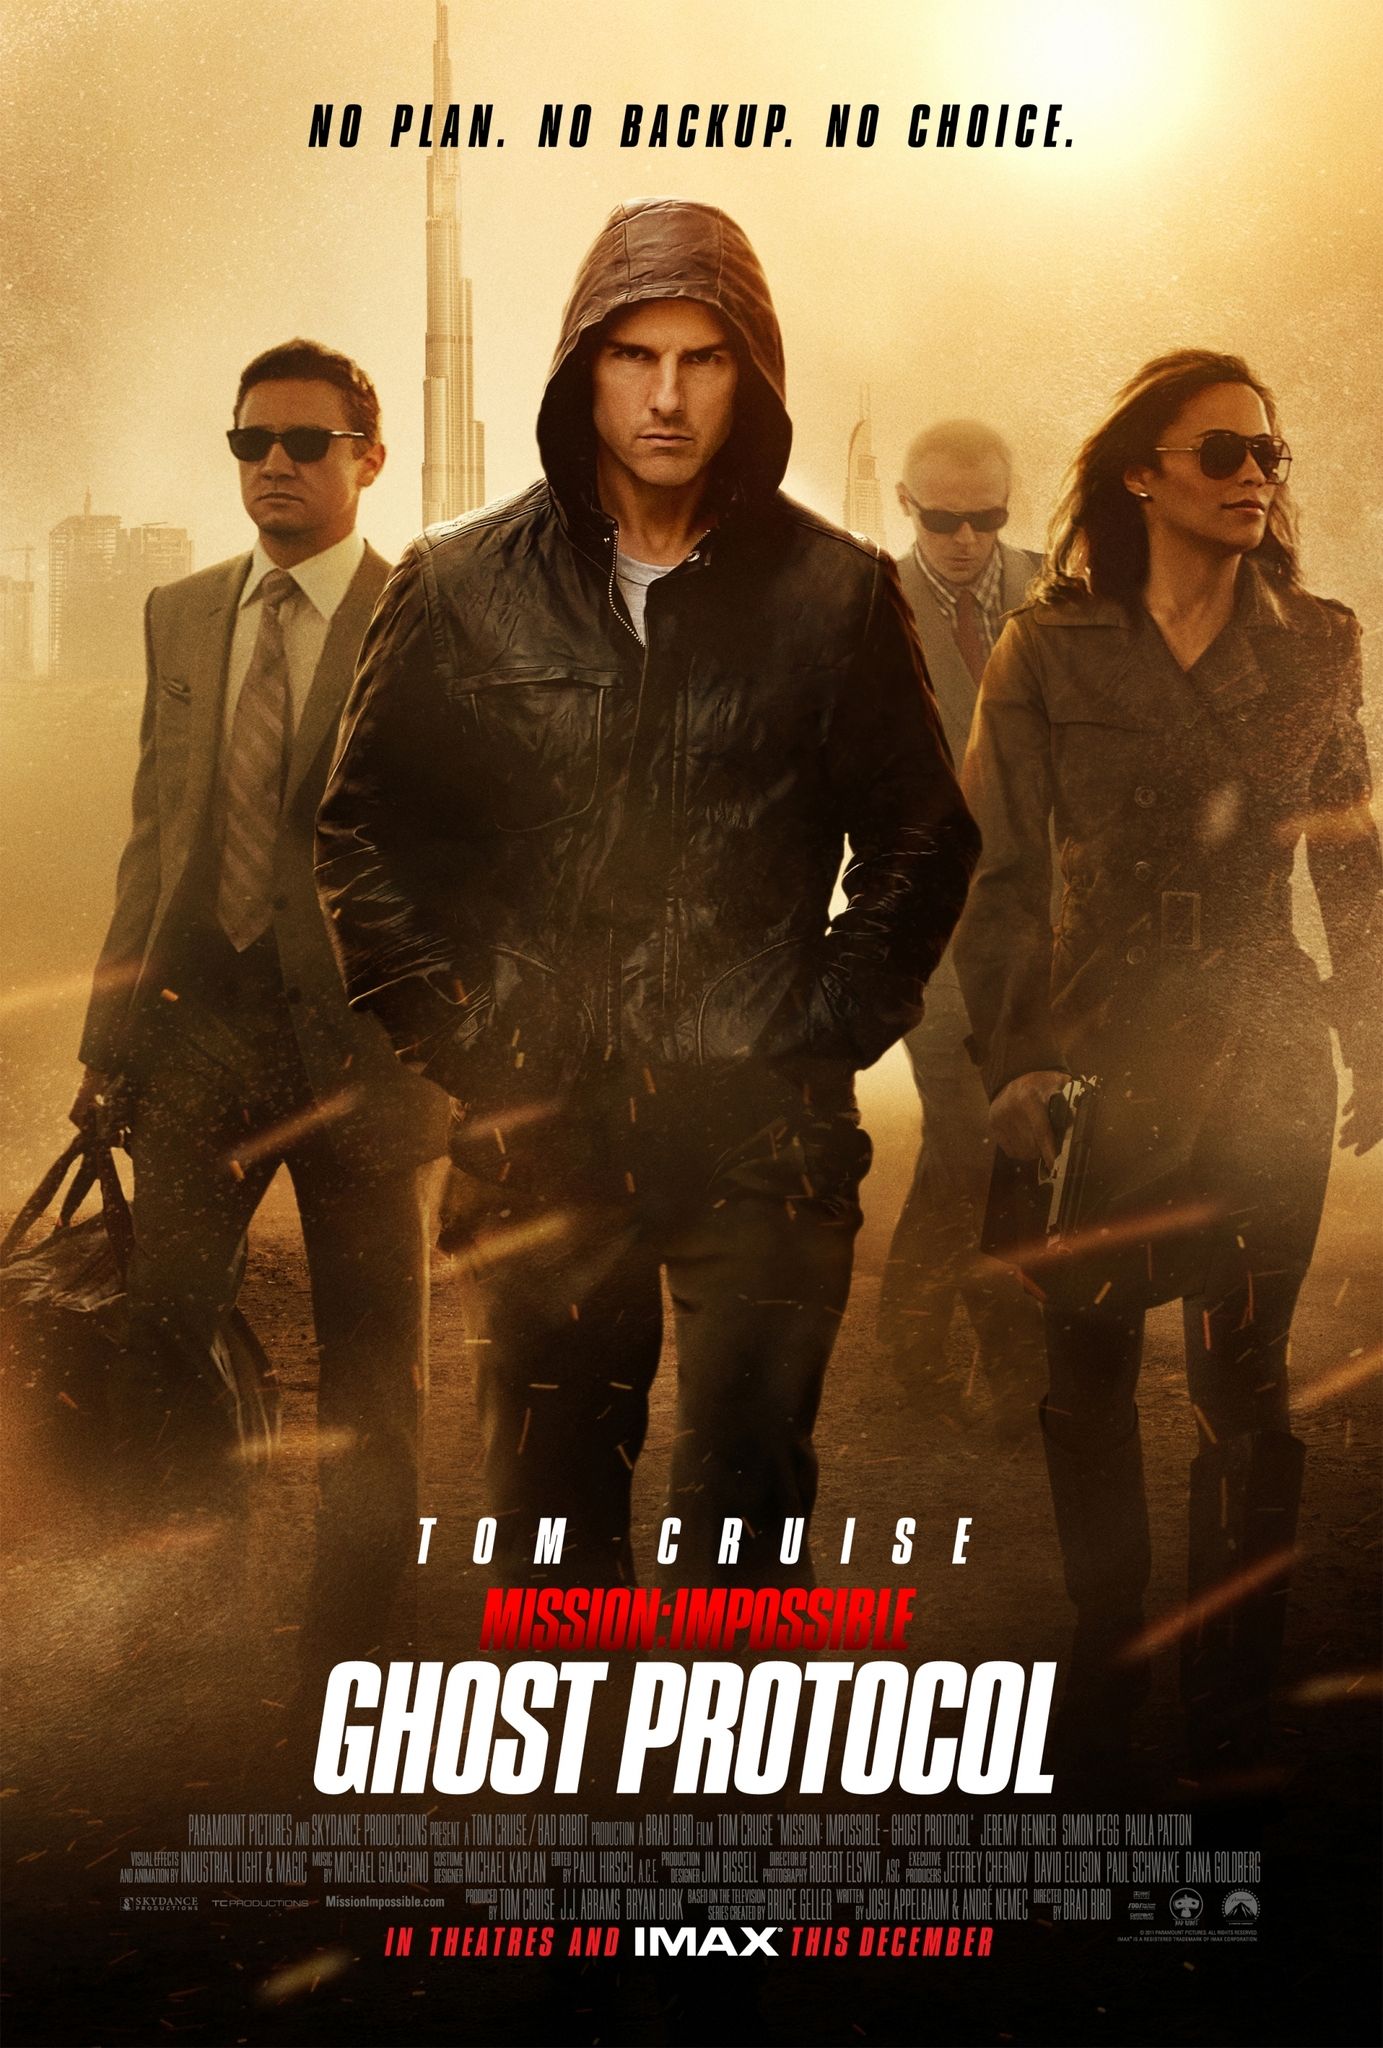 Mission Impossible  Ghost Protocol (2011) Hindi Dubbed Full Movie